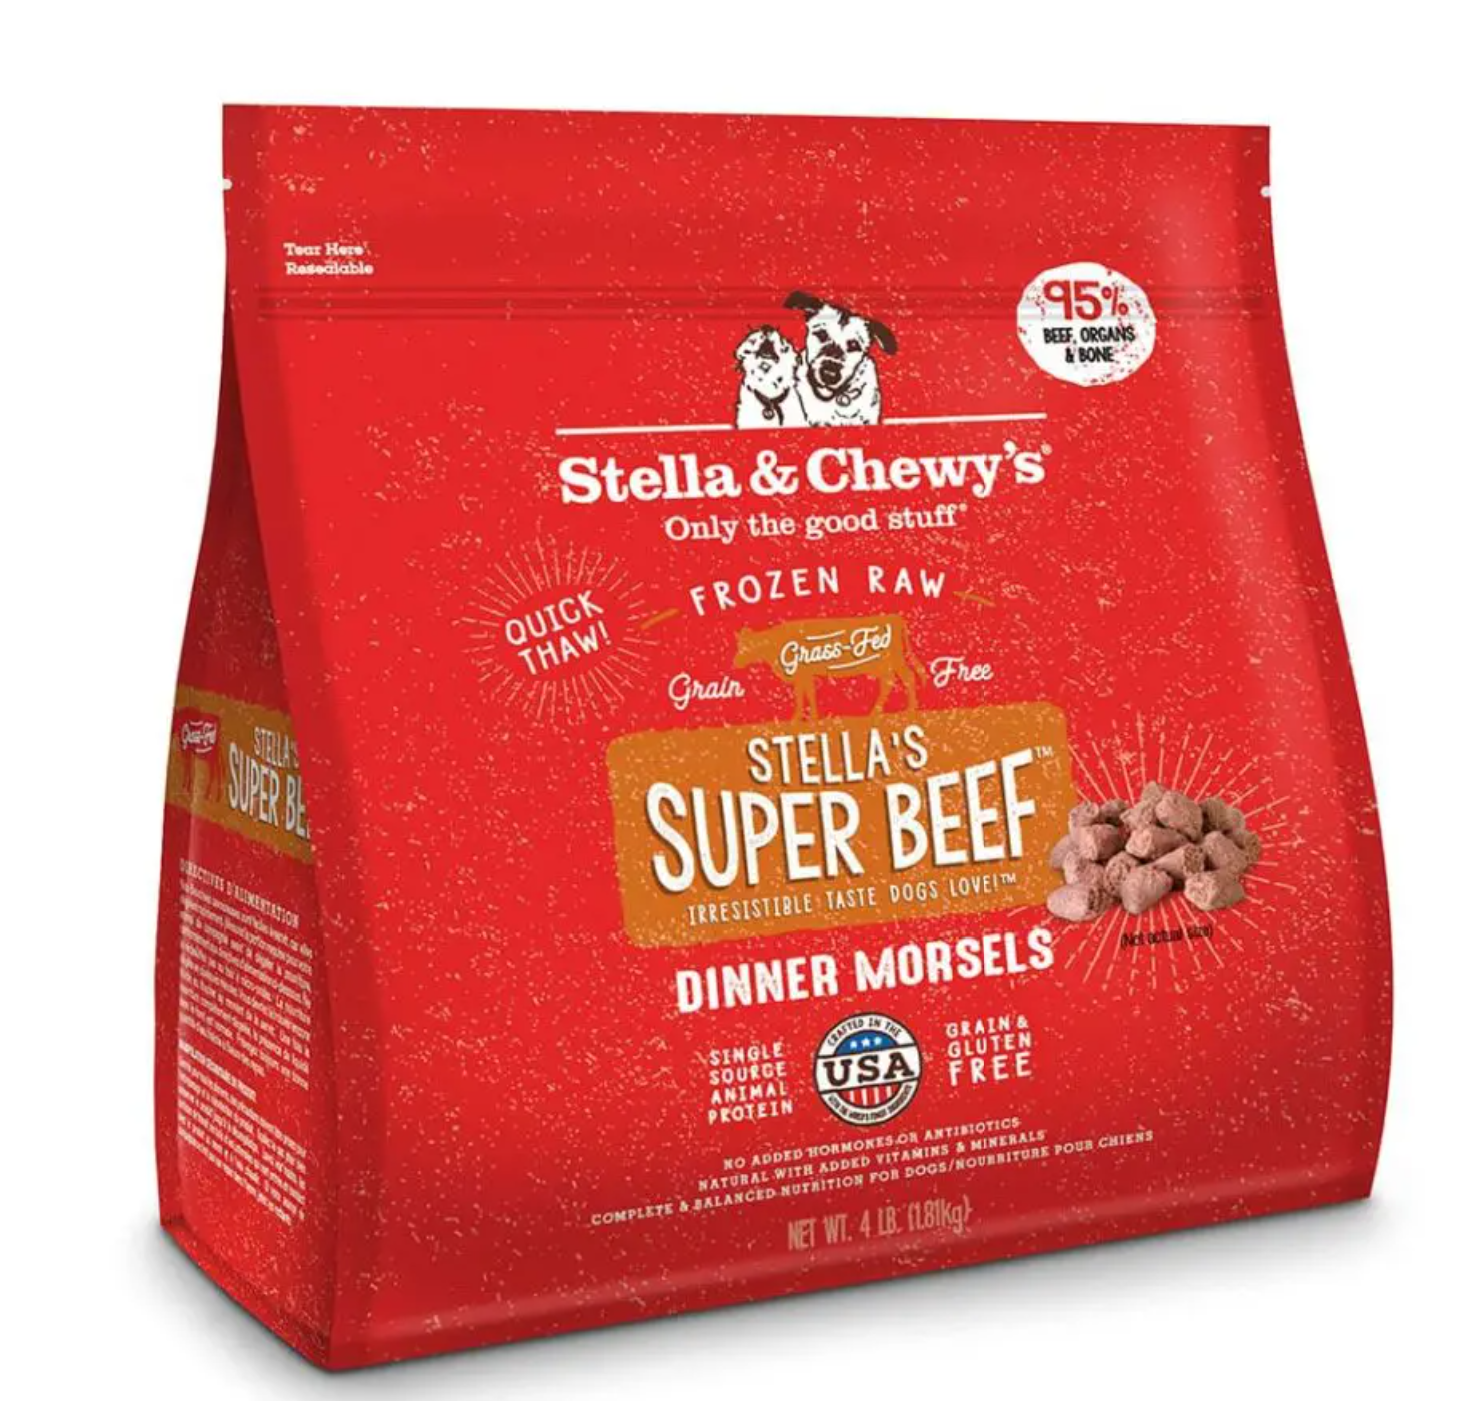 Stella & Chewy's Frozen Dinner Morsels Beef for Dogs